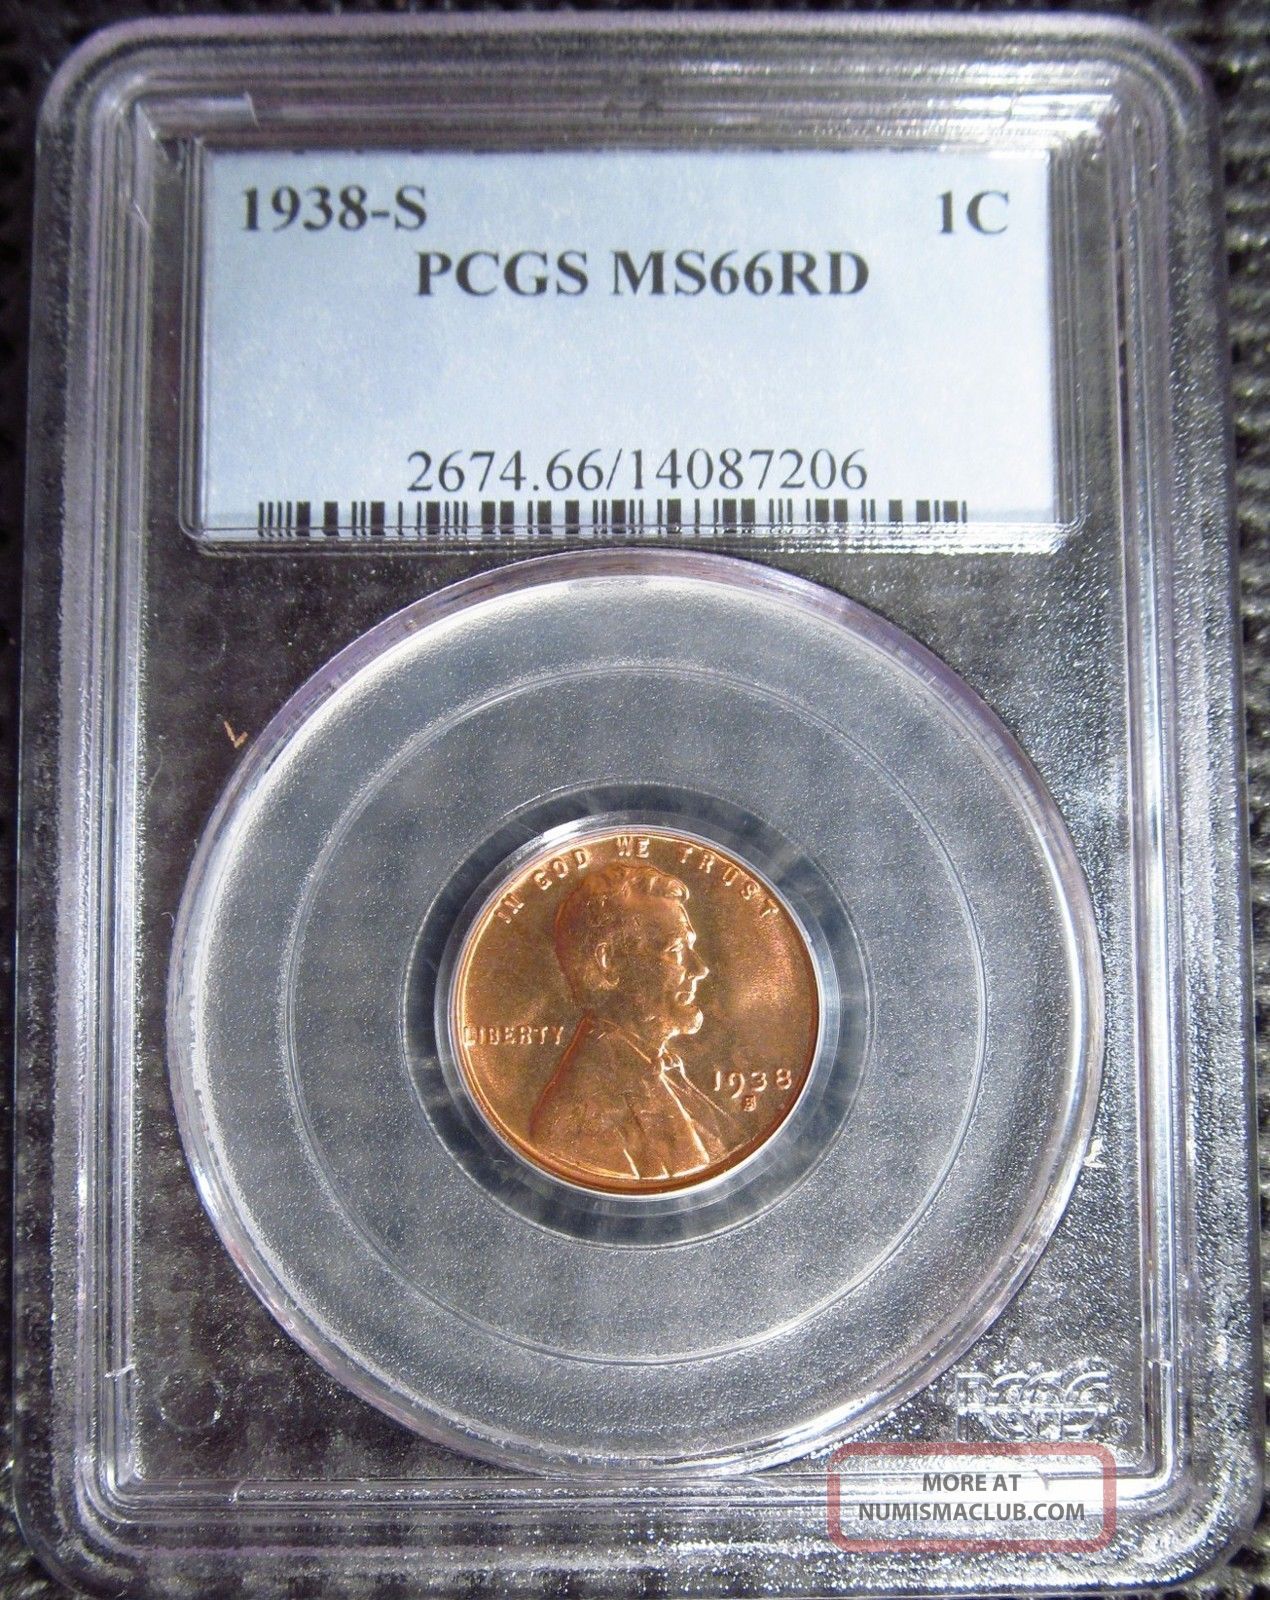 1938 - S Lincoln Cent Pcgs Certified Ms - 66 Red 14087206 A